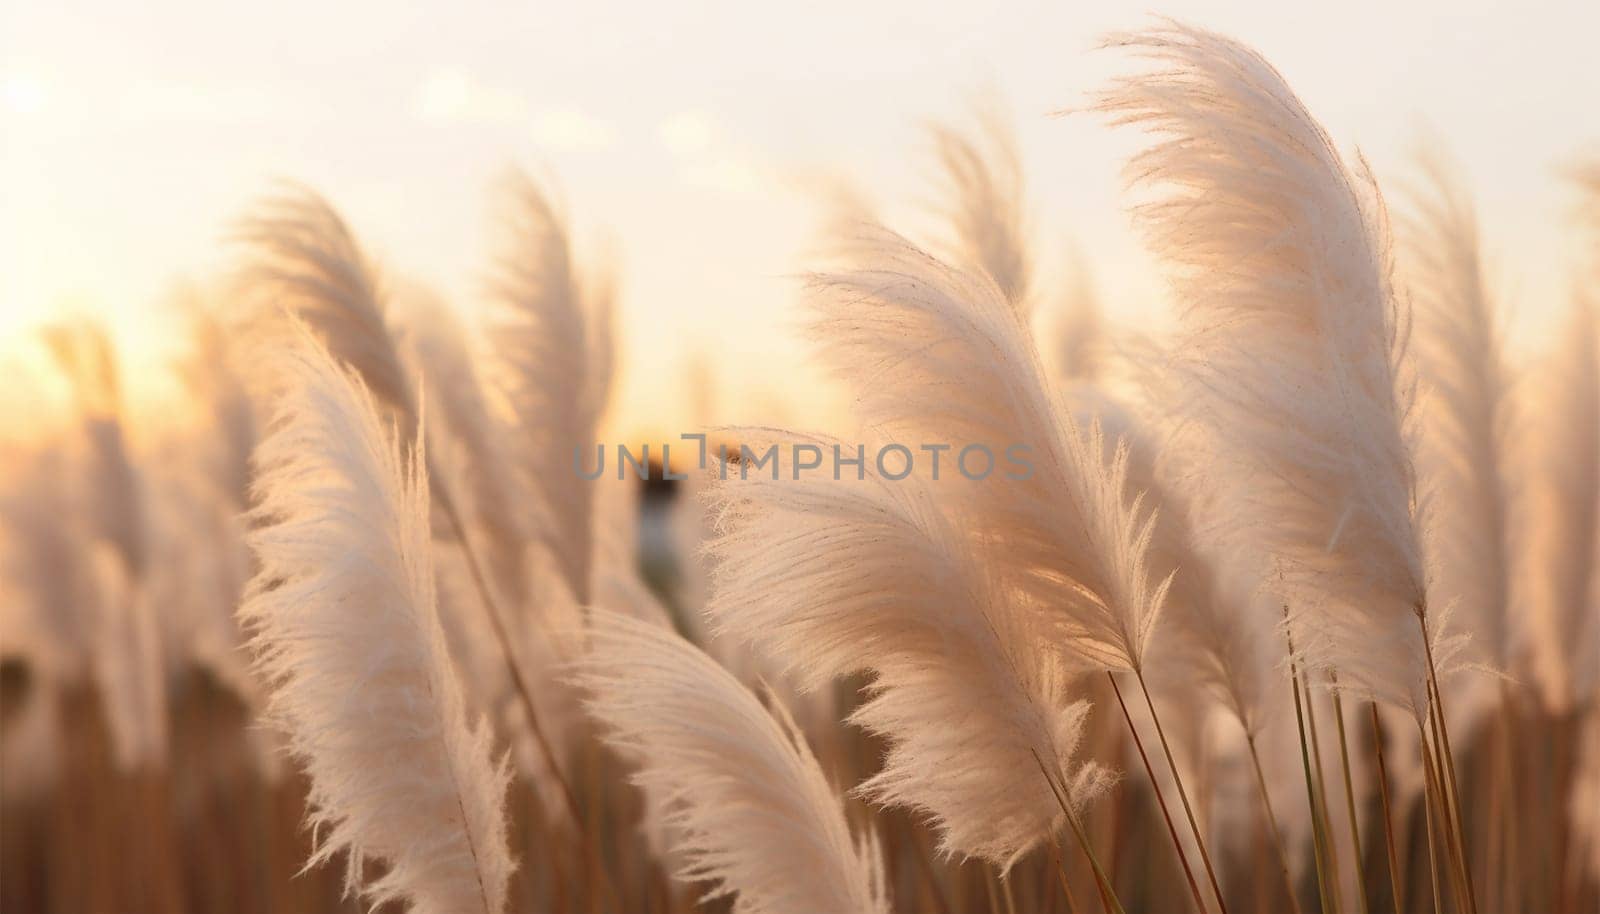 Pampas grass in the sky, Abstract natural background of soft plants Cortaderia selloana moving in the wind. Bright and clear scene of plants similar to feather dusters. beauty. Abstract natural background boho design sunlight